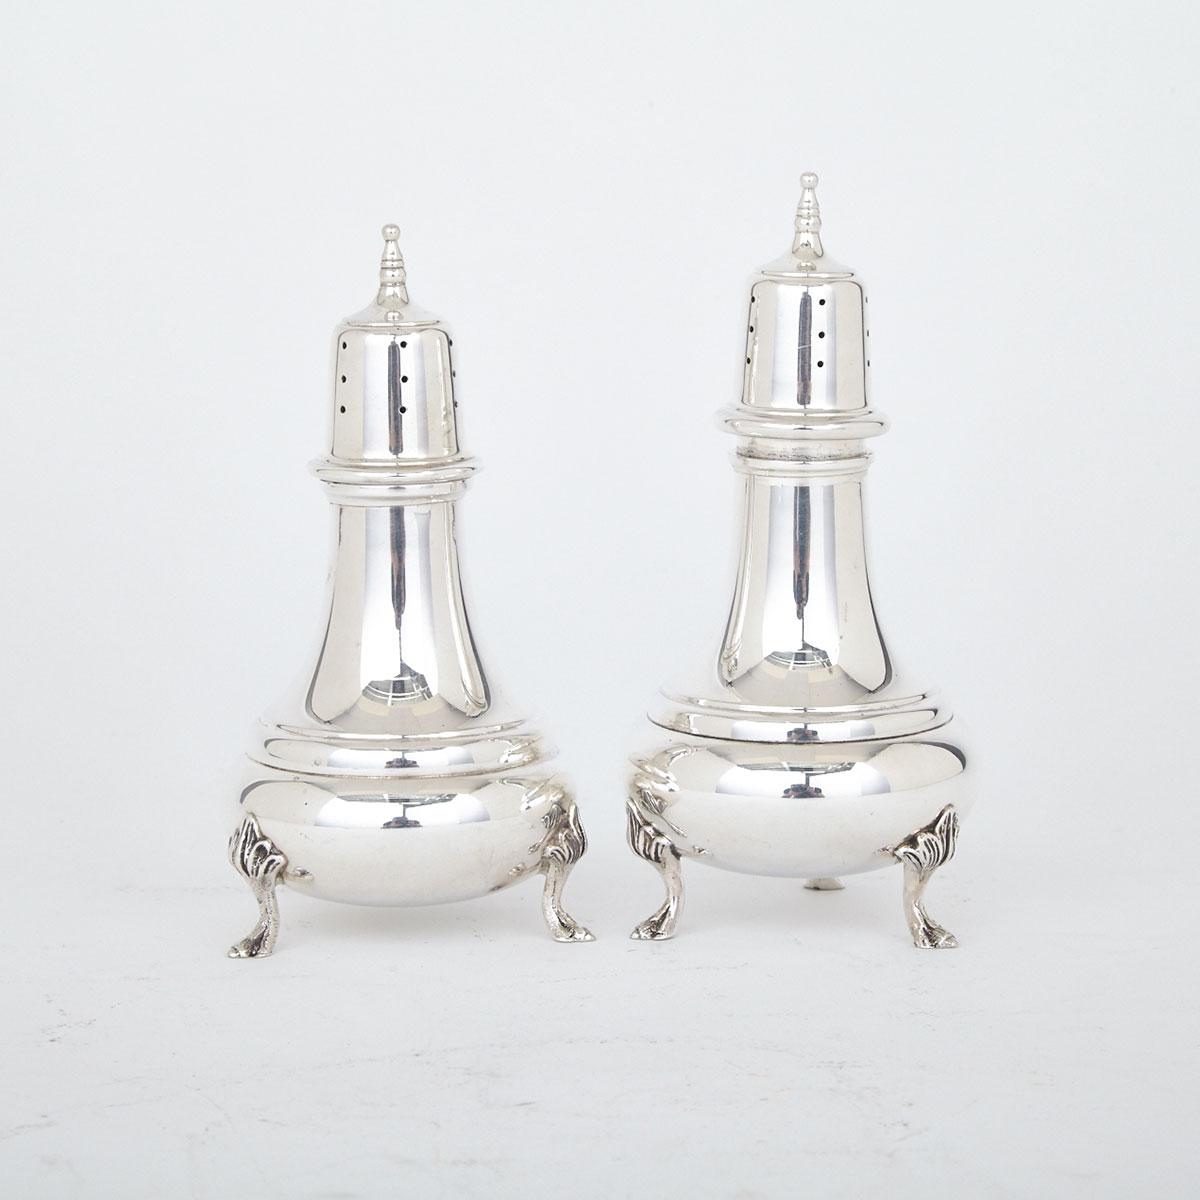 Pair of American Silver Pepper Casters, Durham Silver Co., New York, N.Y., mid-20th century